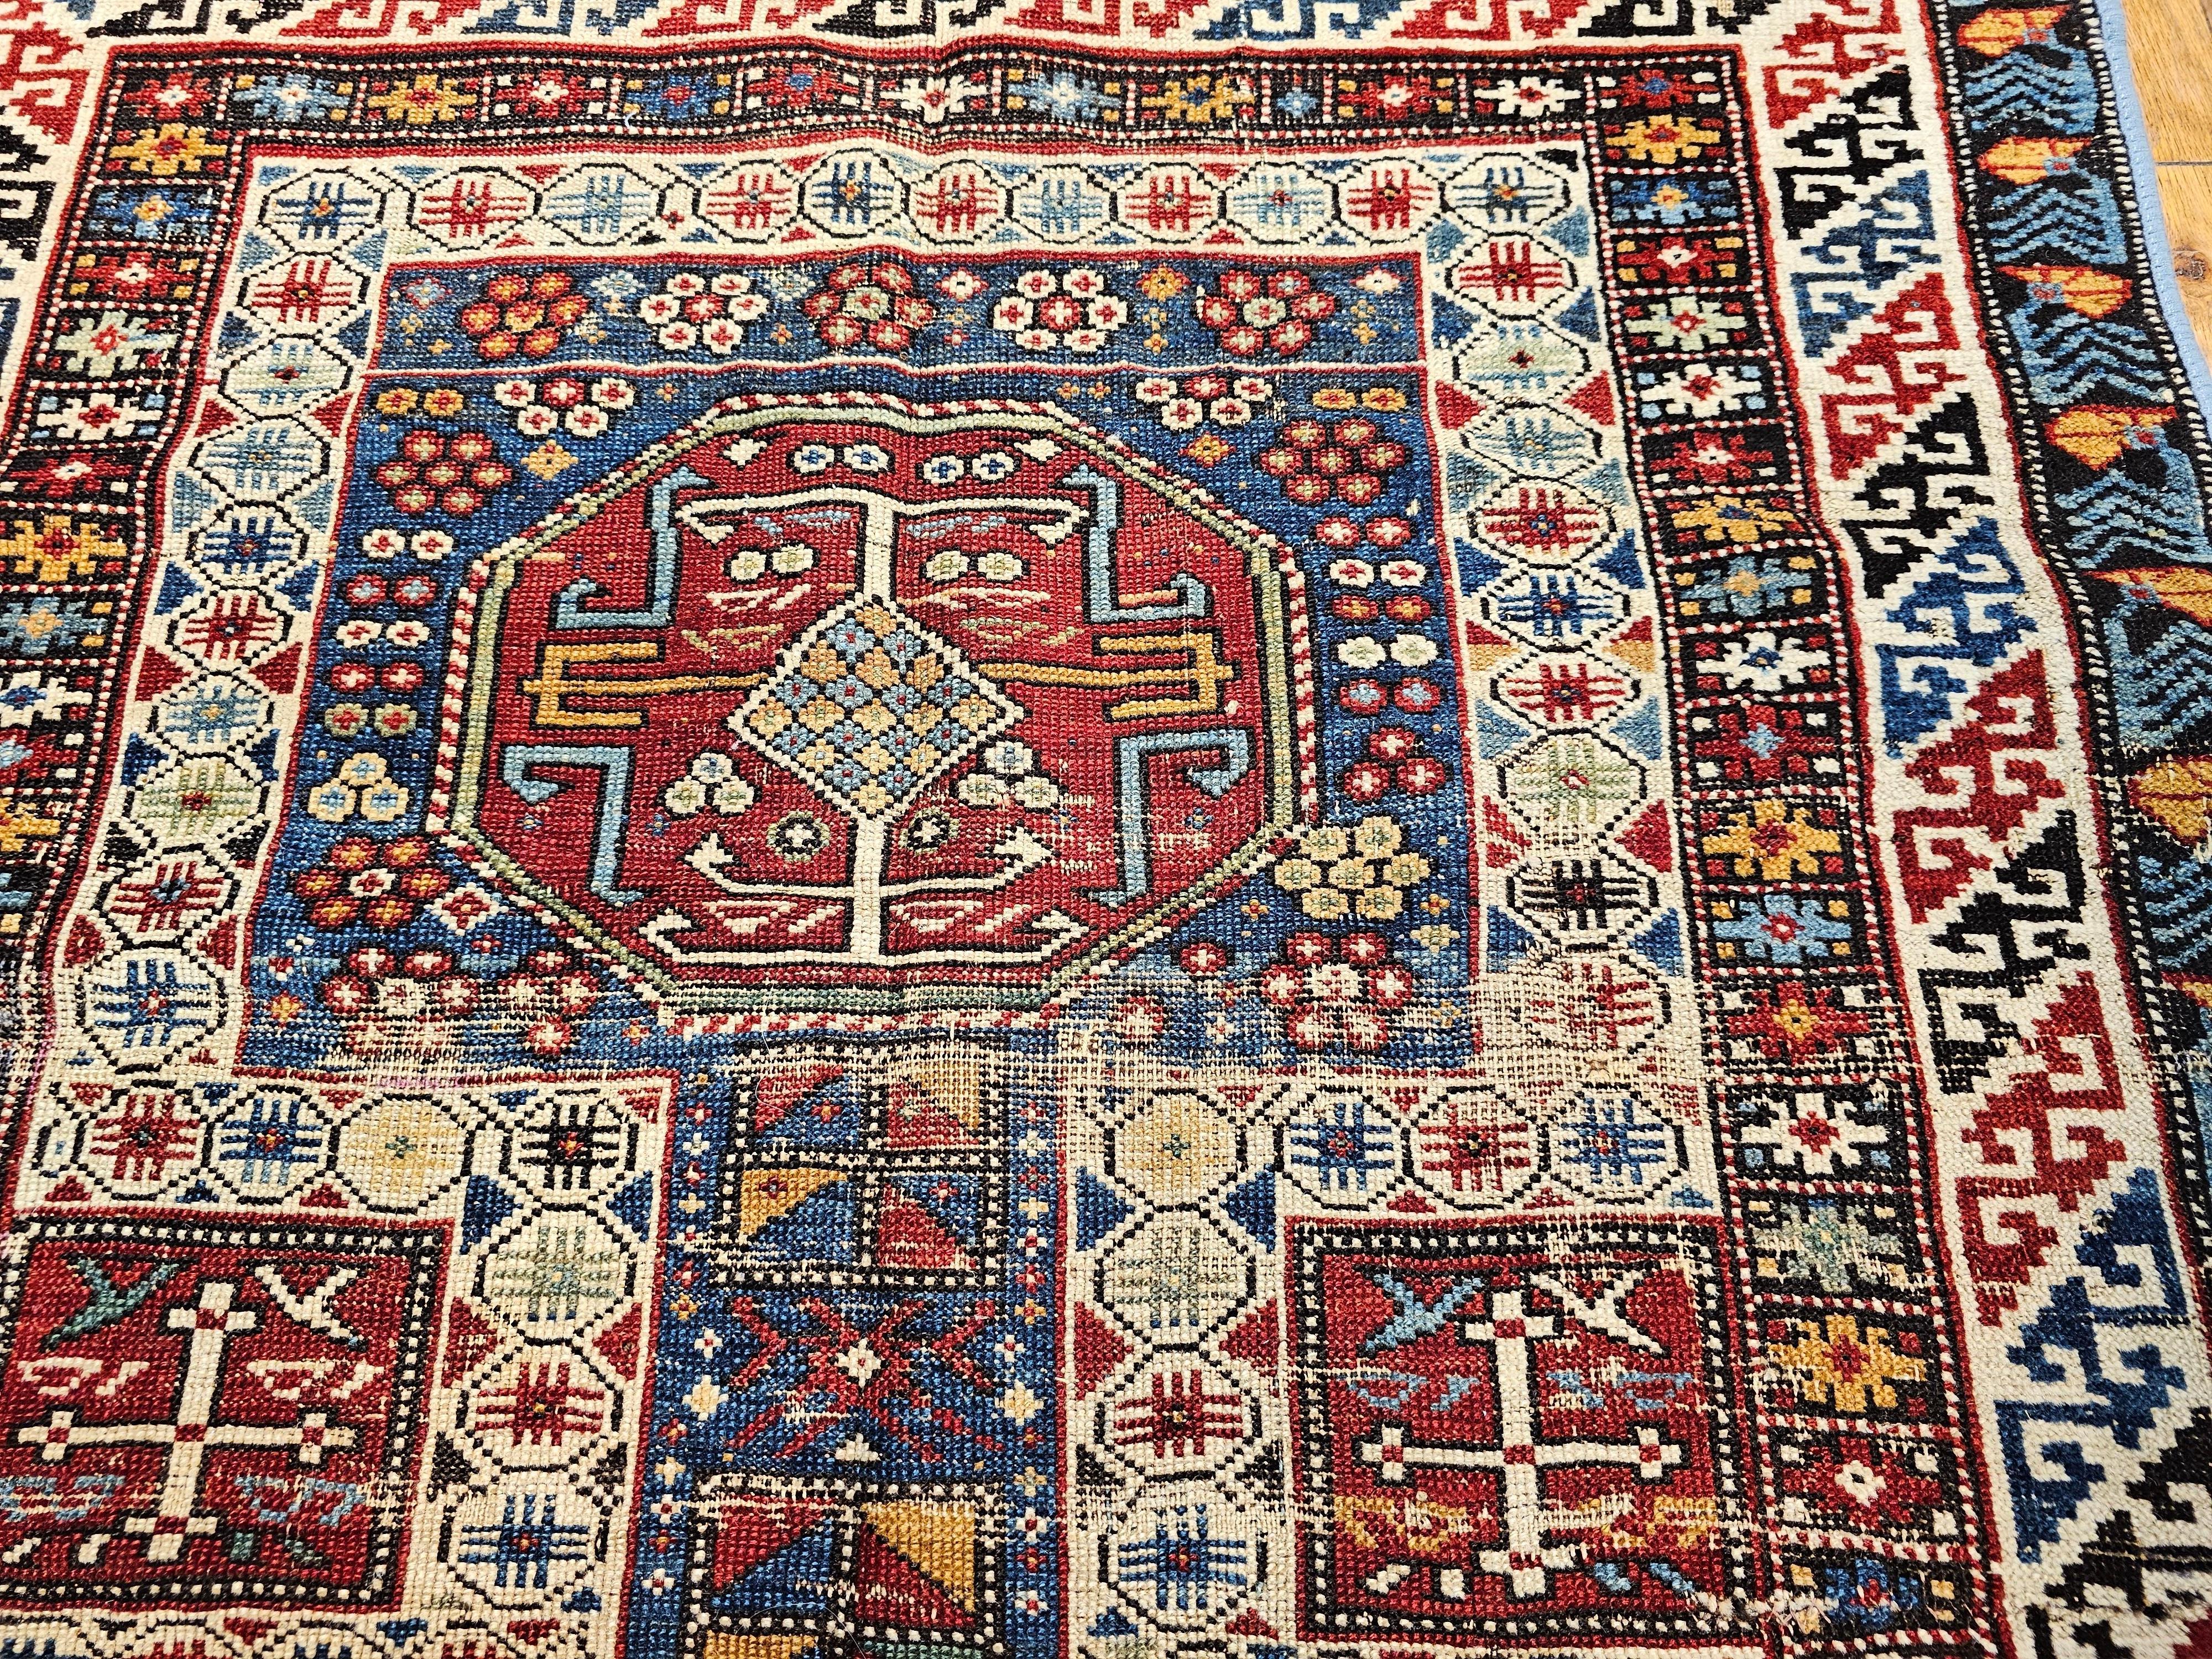  Early 1900s Caucasian Kuba Area Rug in French Blue, Red, Ivory, Yellow For Sale 4